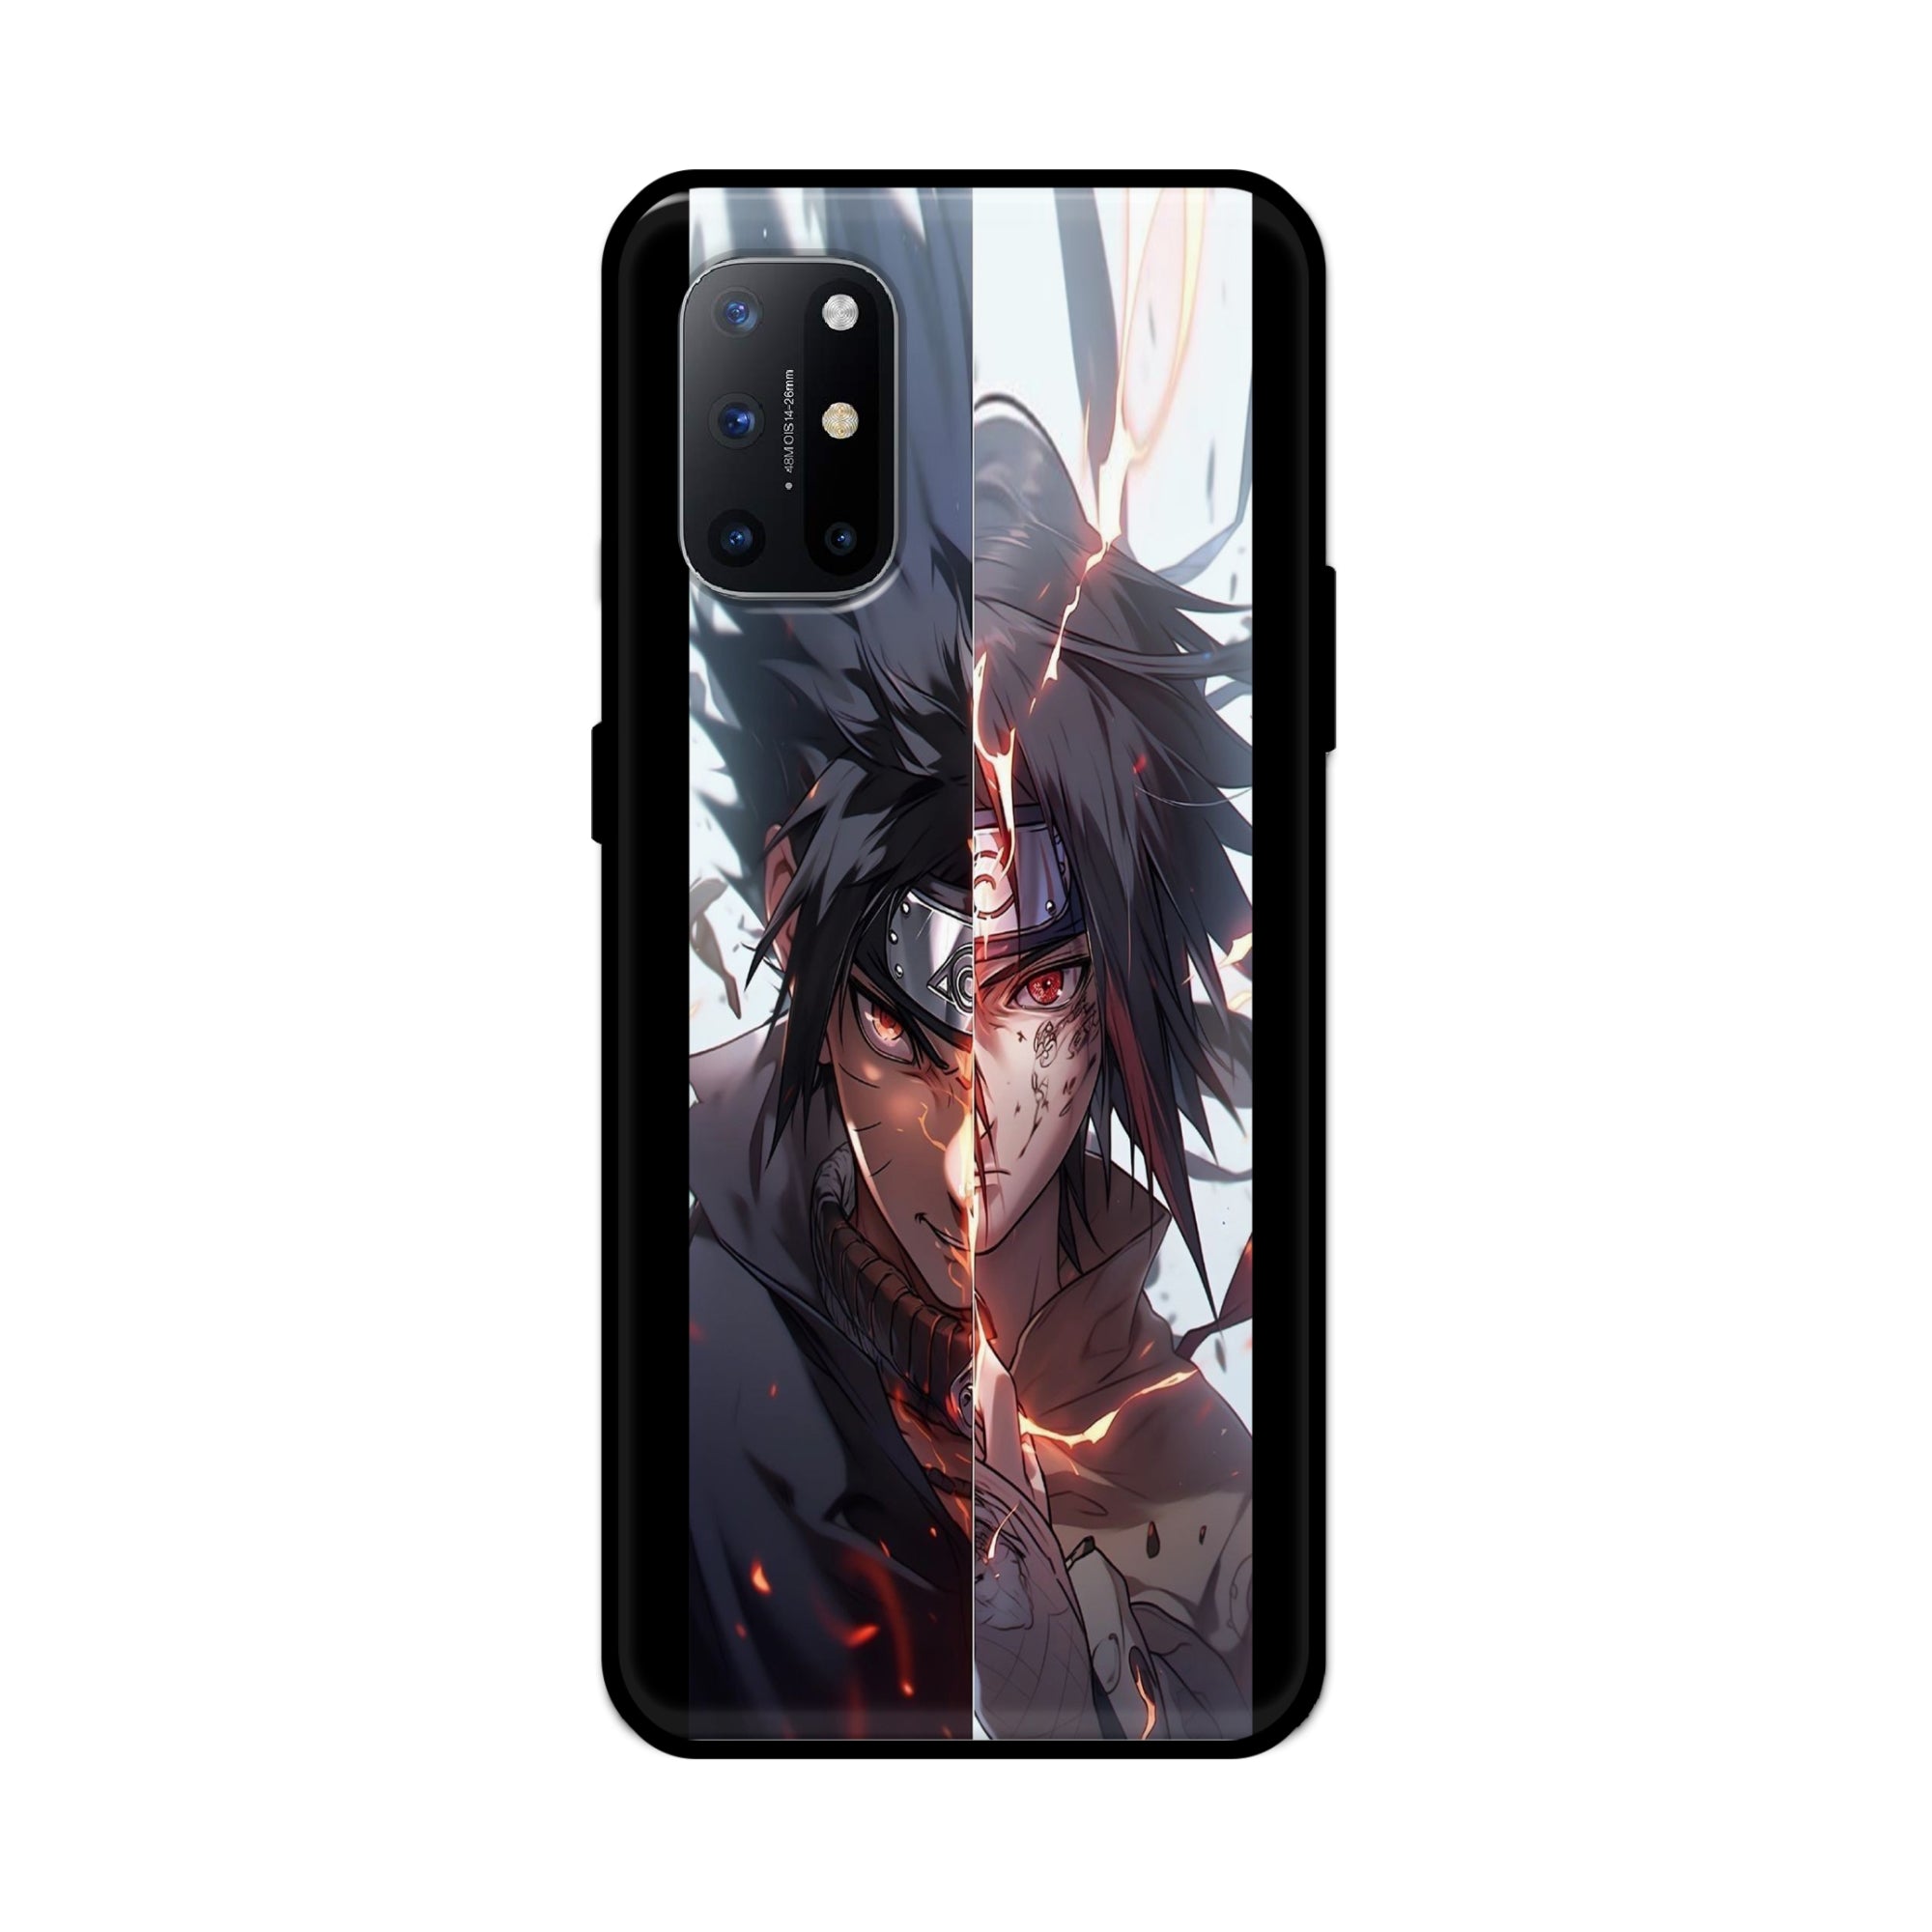 Buy Hitach Vs Kakachi Metal-Silicon Back Mobile Phone Case/Cover For Oneplus 9R / 8T Online